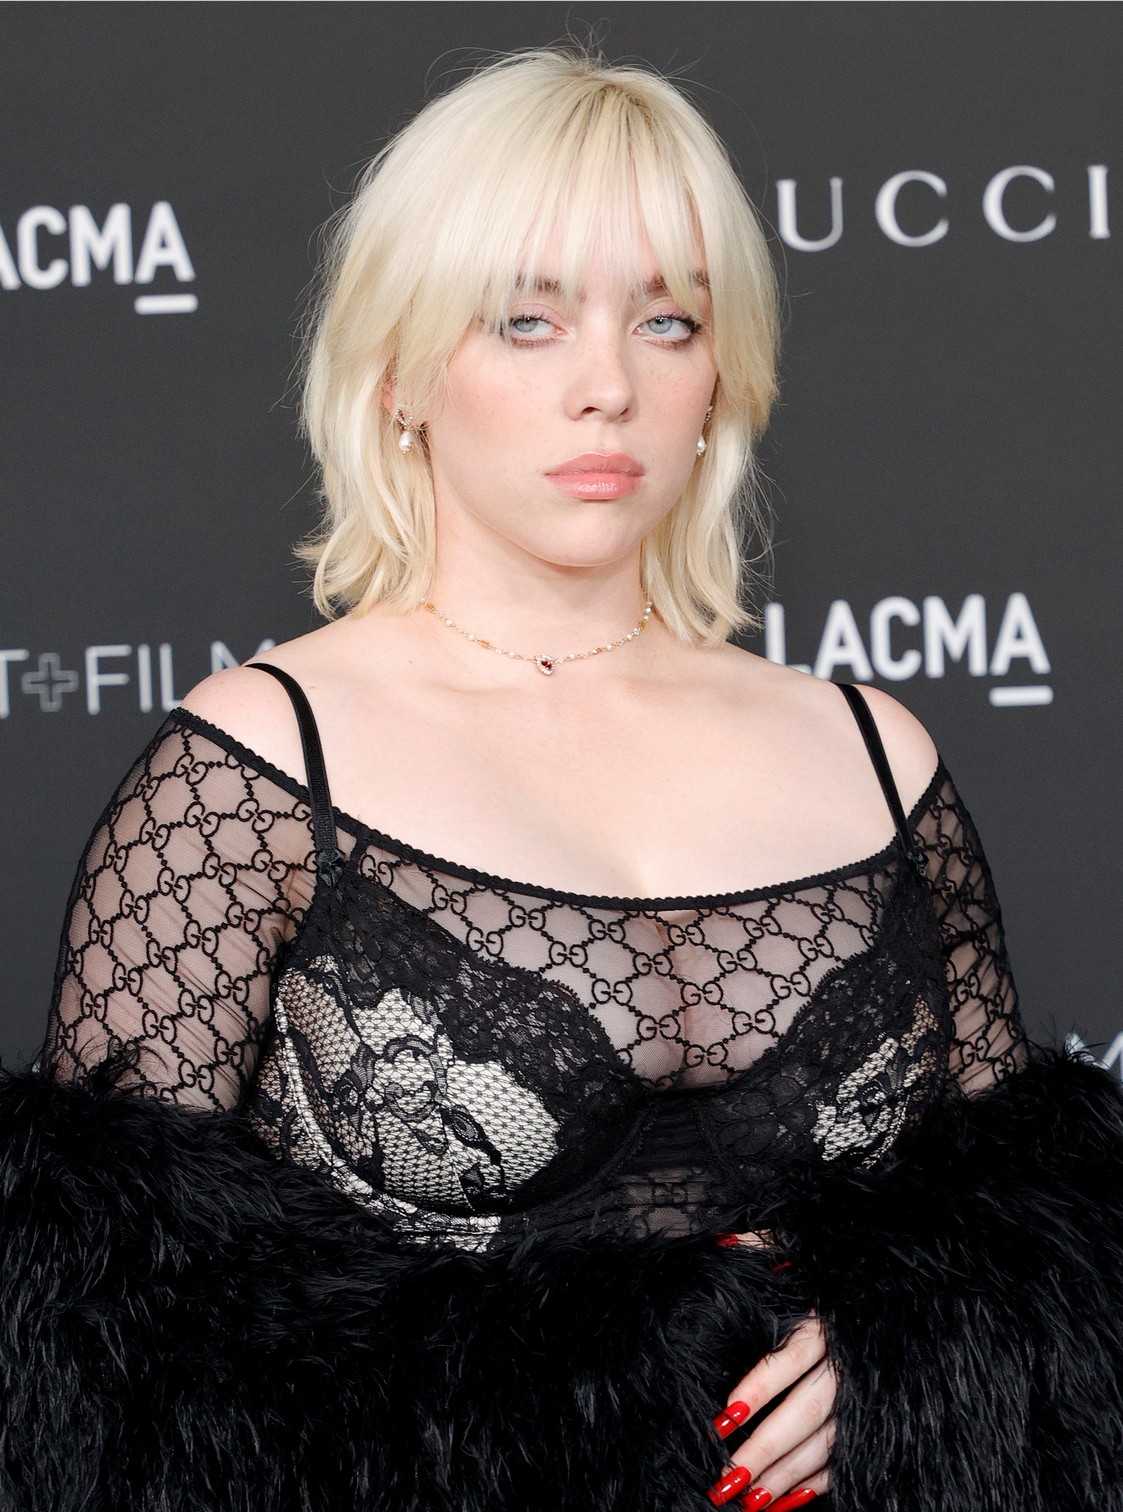 Billie Eilish Showed Her Tits For The First Time TheFappening.Pro 5 - Billie Eilish Hot In A Revealing Outfit (13 Photos)